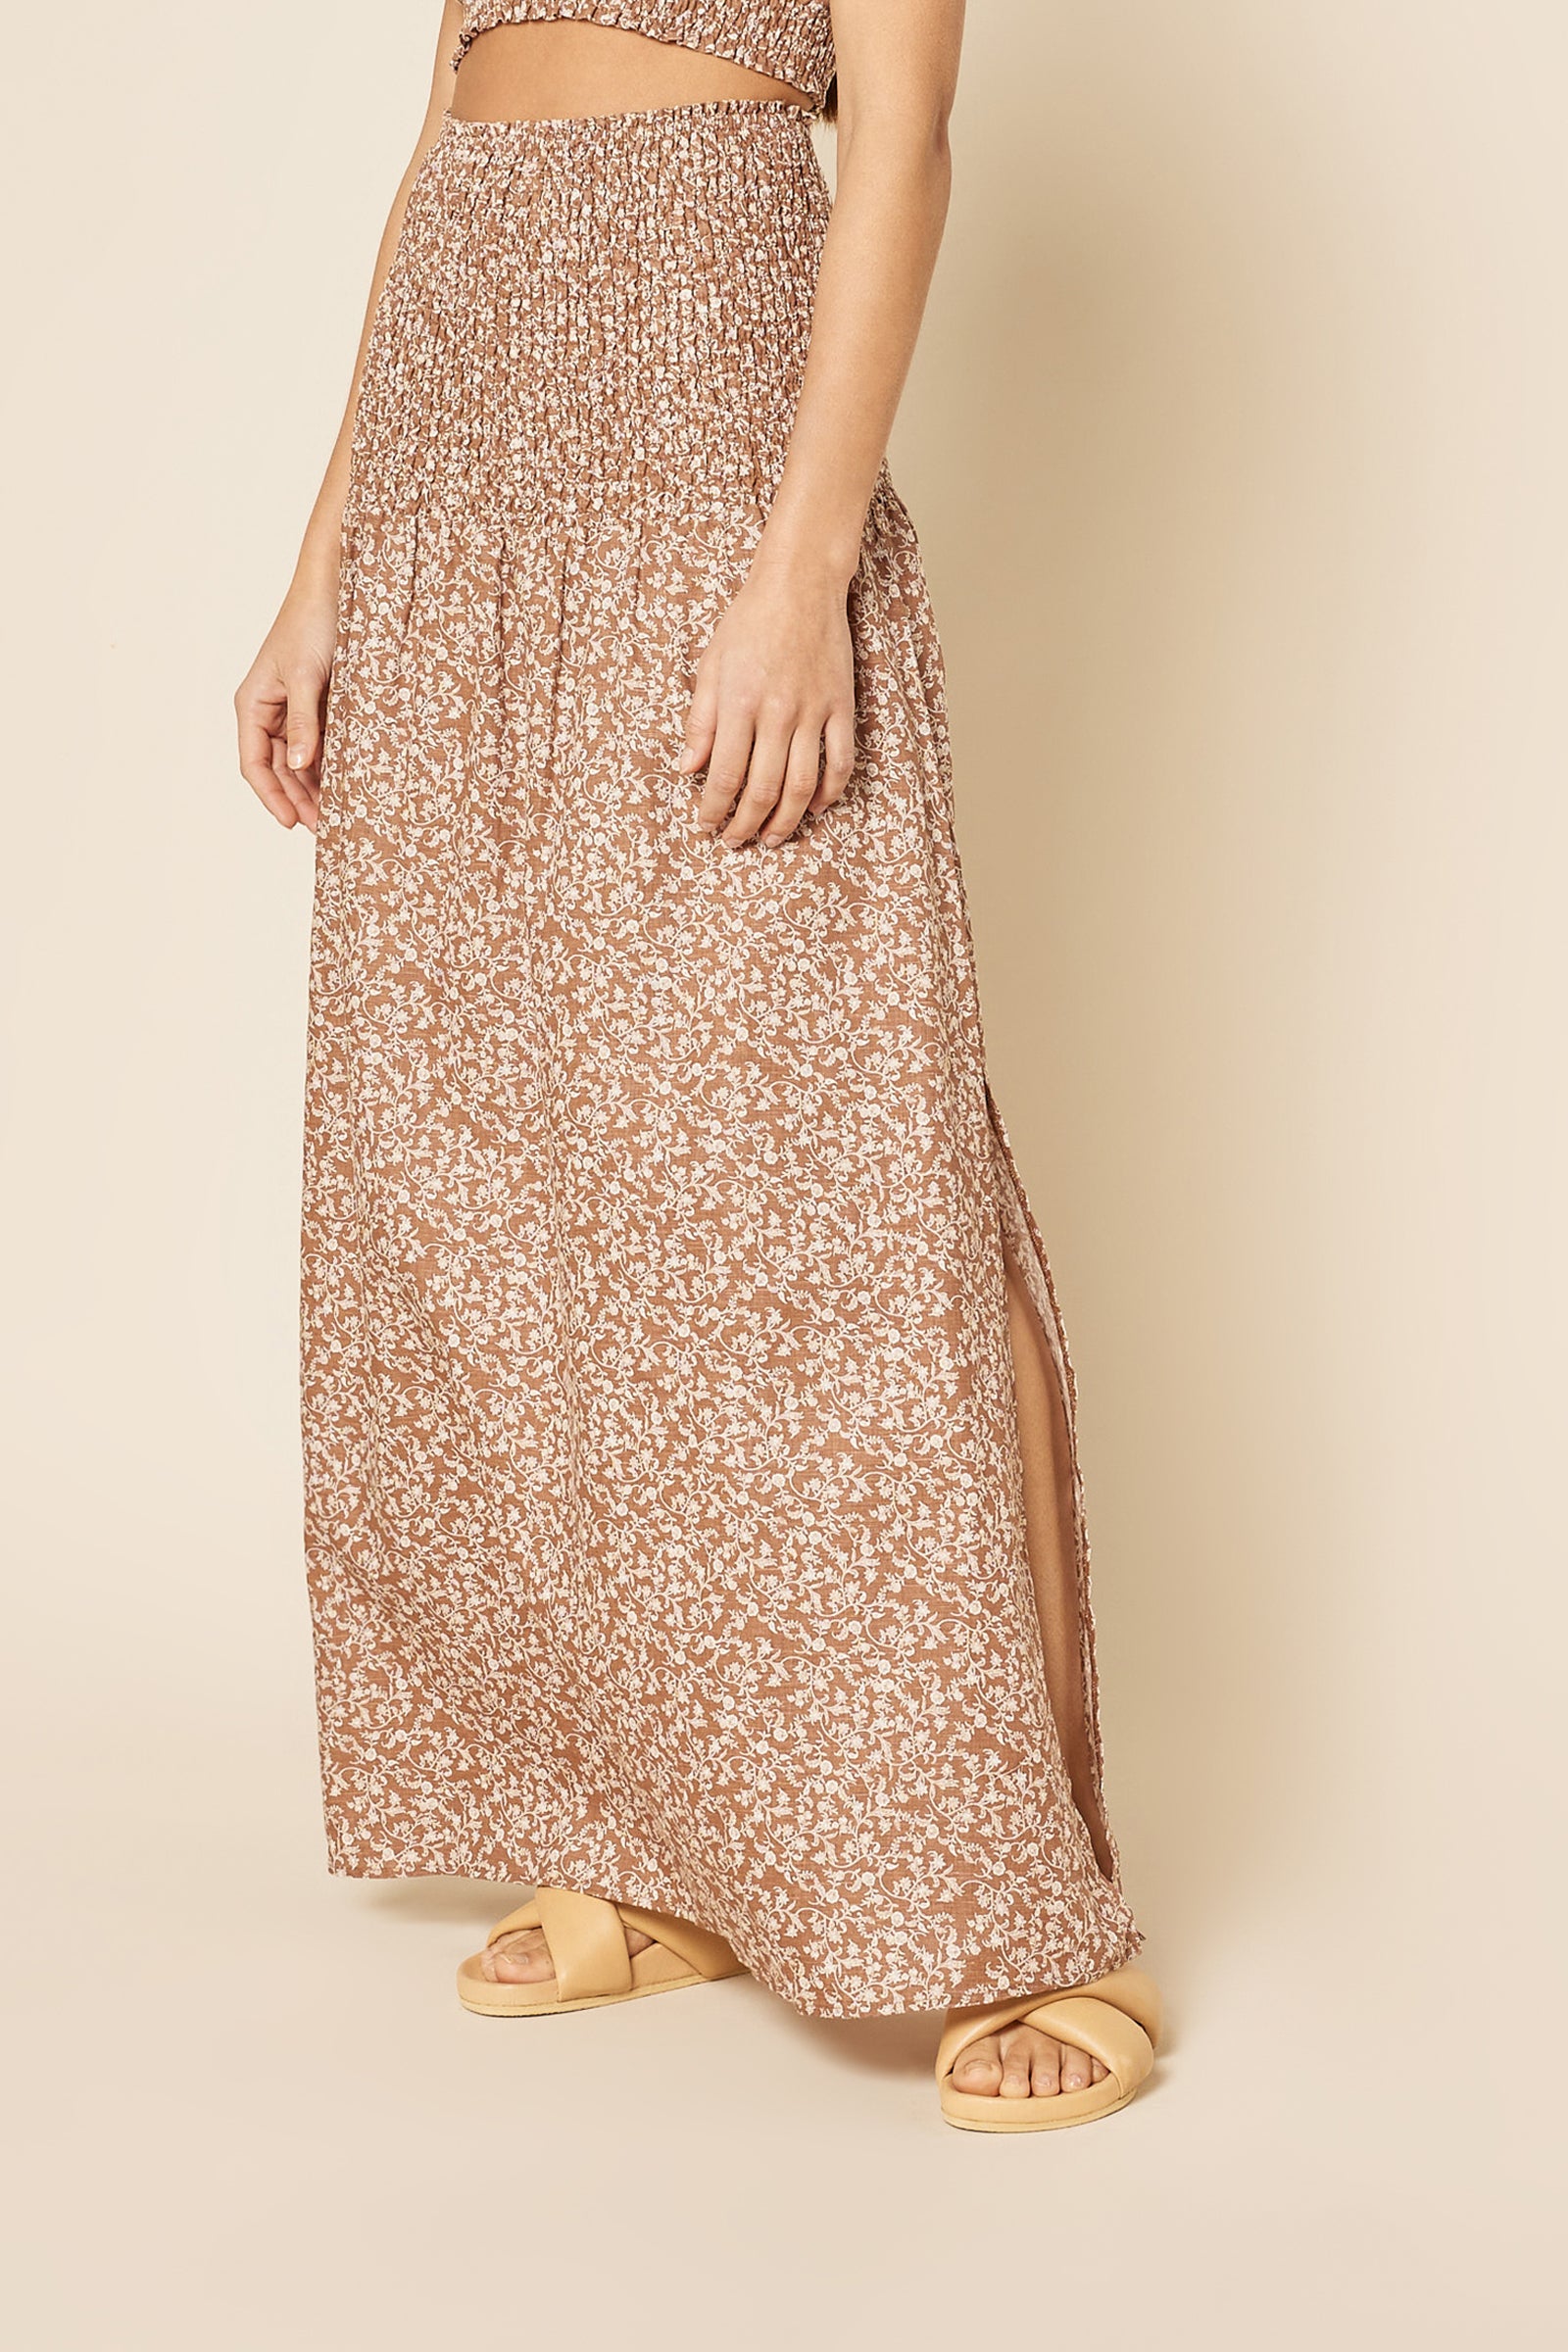 Nude Lucy Alina Maxi Skirt Persian in a Floral Print